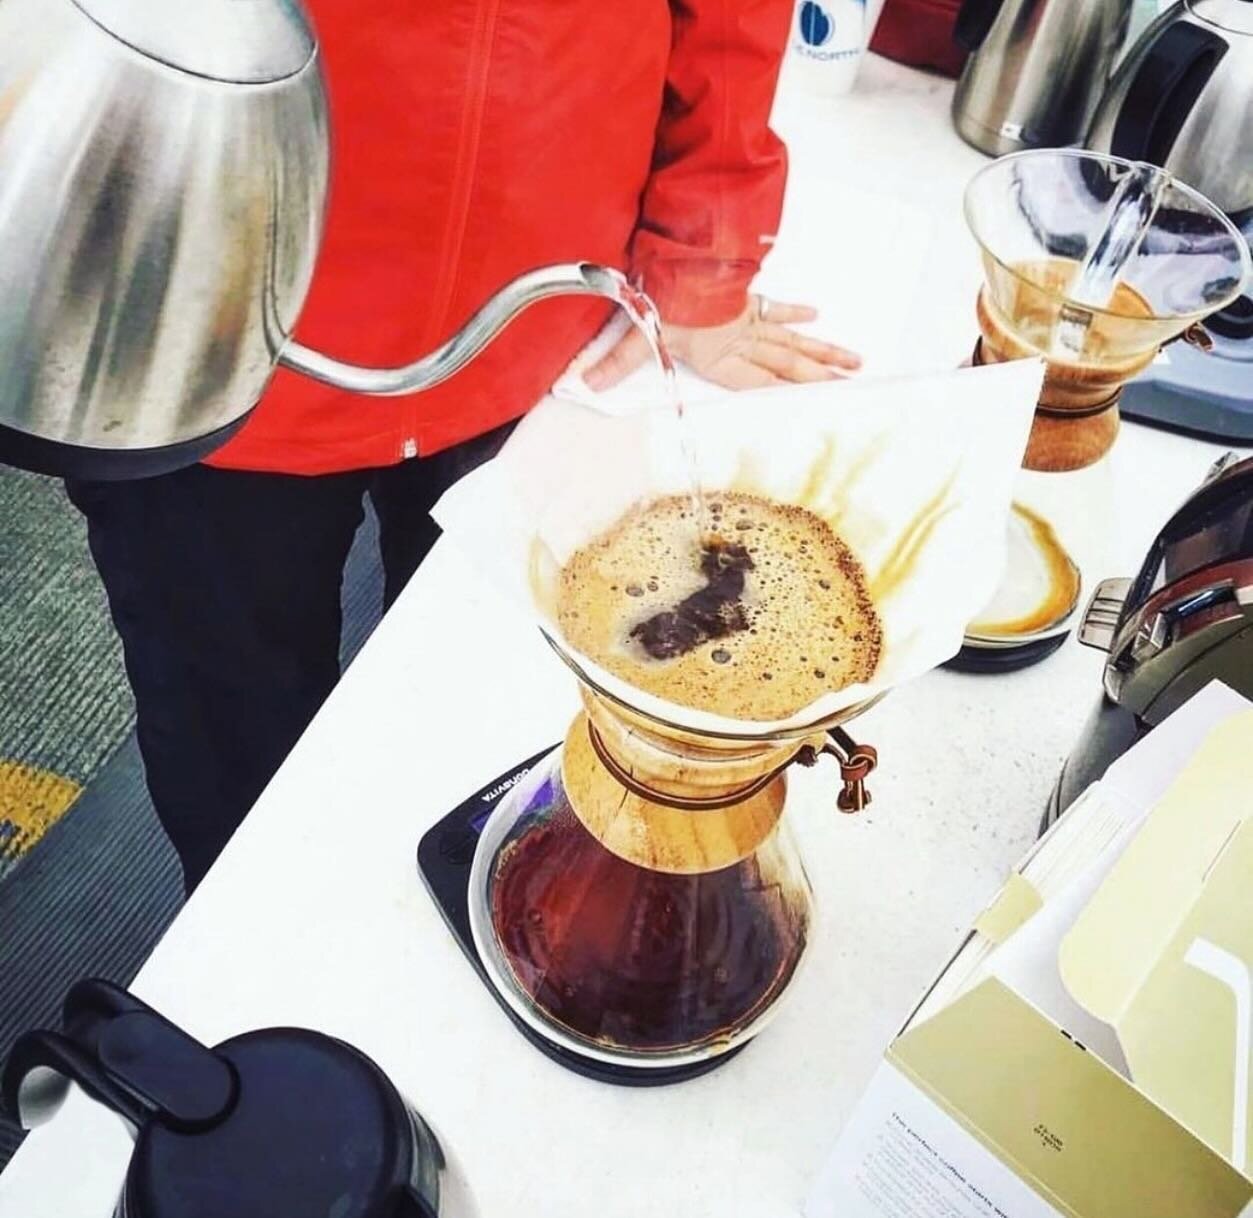 Pour over or Nitro coffee? The talented team (John &amp; Maine) that started @drinktruenorth offer locally-roasted beans from around the world! Grab a coffee curbside every Sunday or grab some beans to enjoy at home. You can also grab a sweet treats 